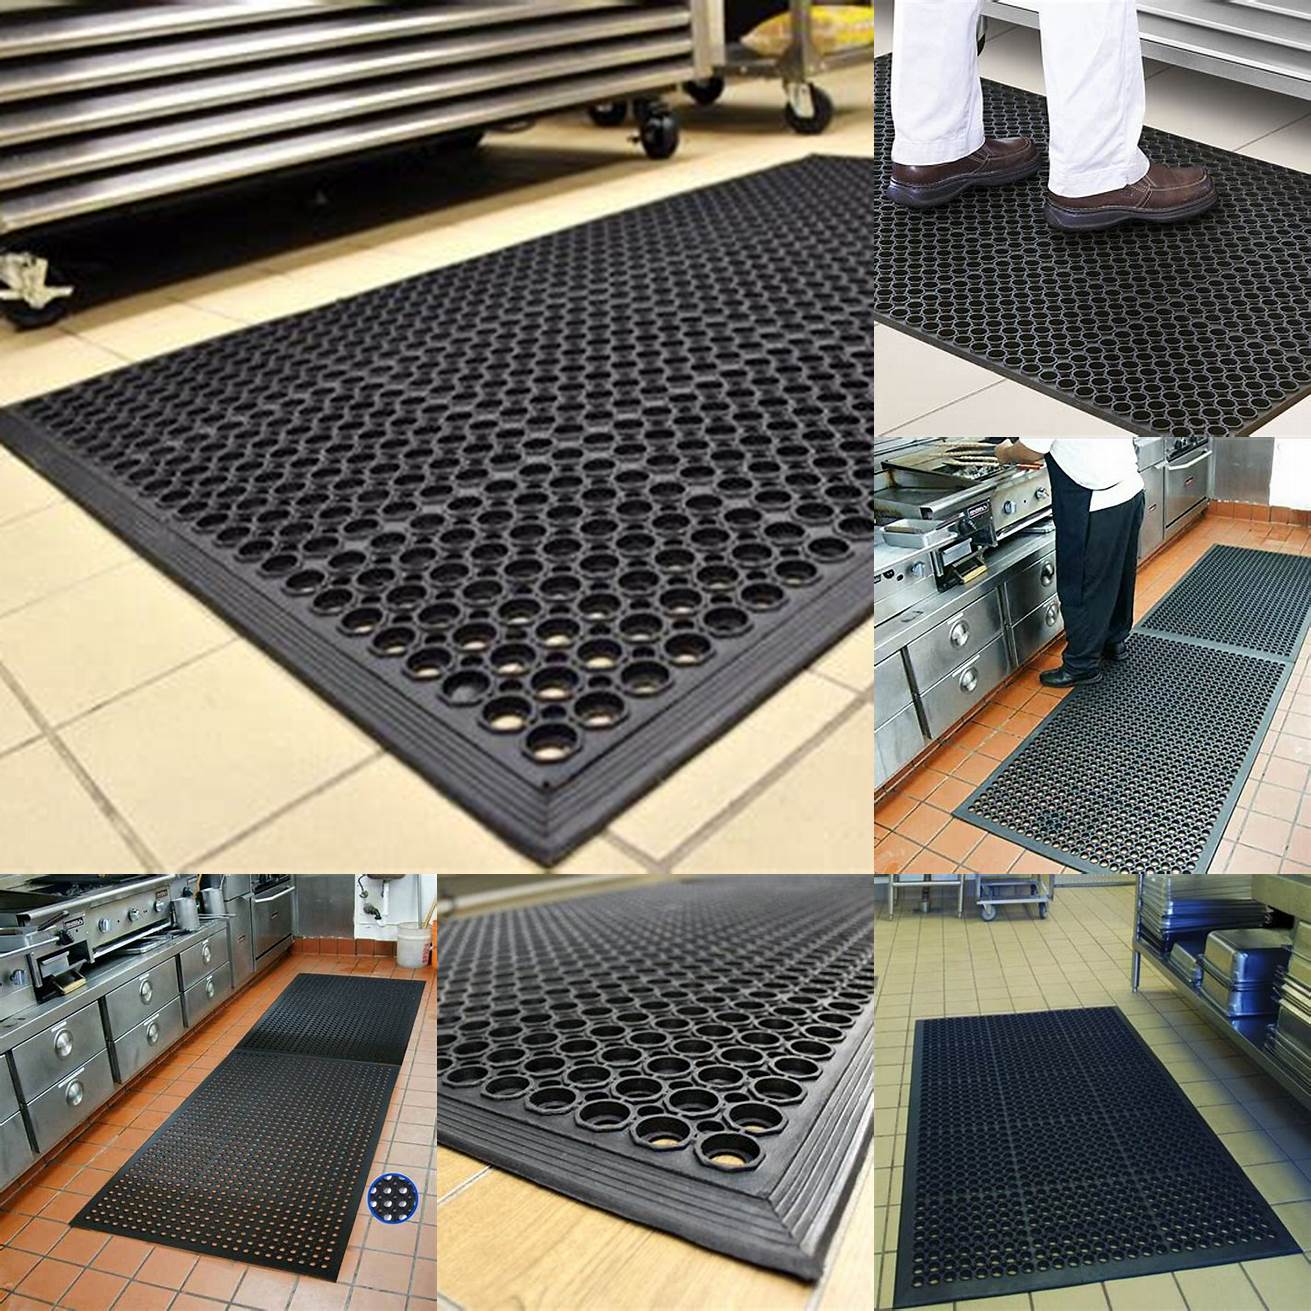 1 Rubber Rubber mats are durable slip-resistant and easy to clean They are ideal for high-traffic areas and commercial kitchens